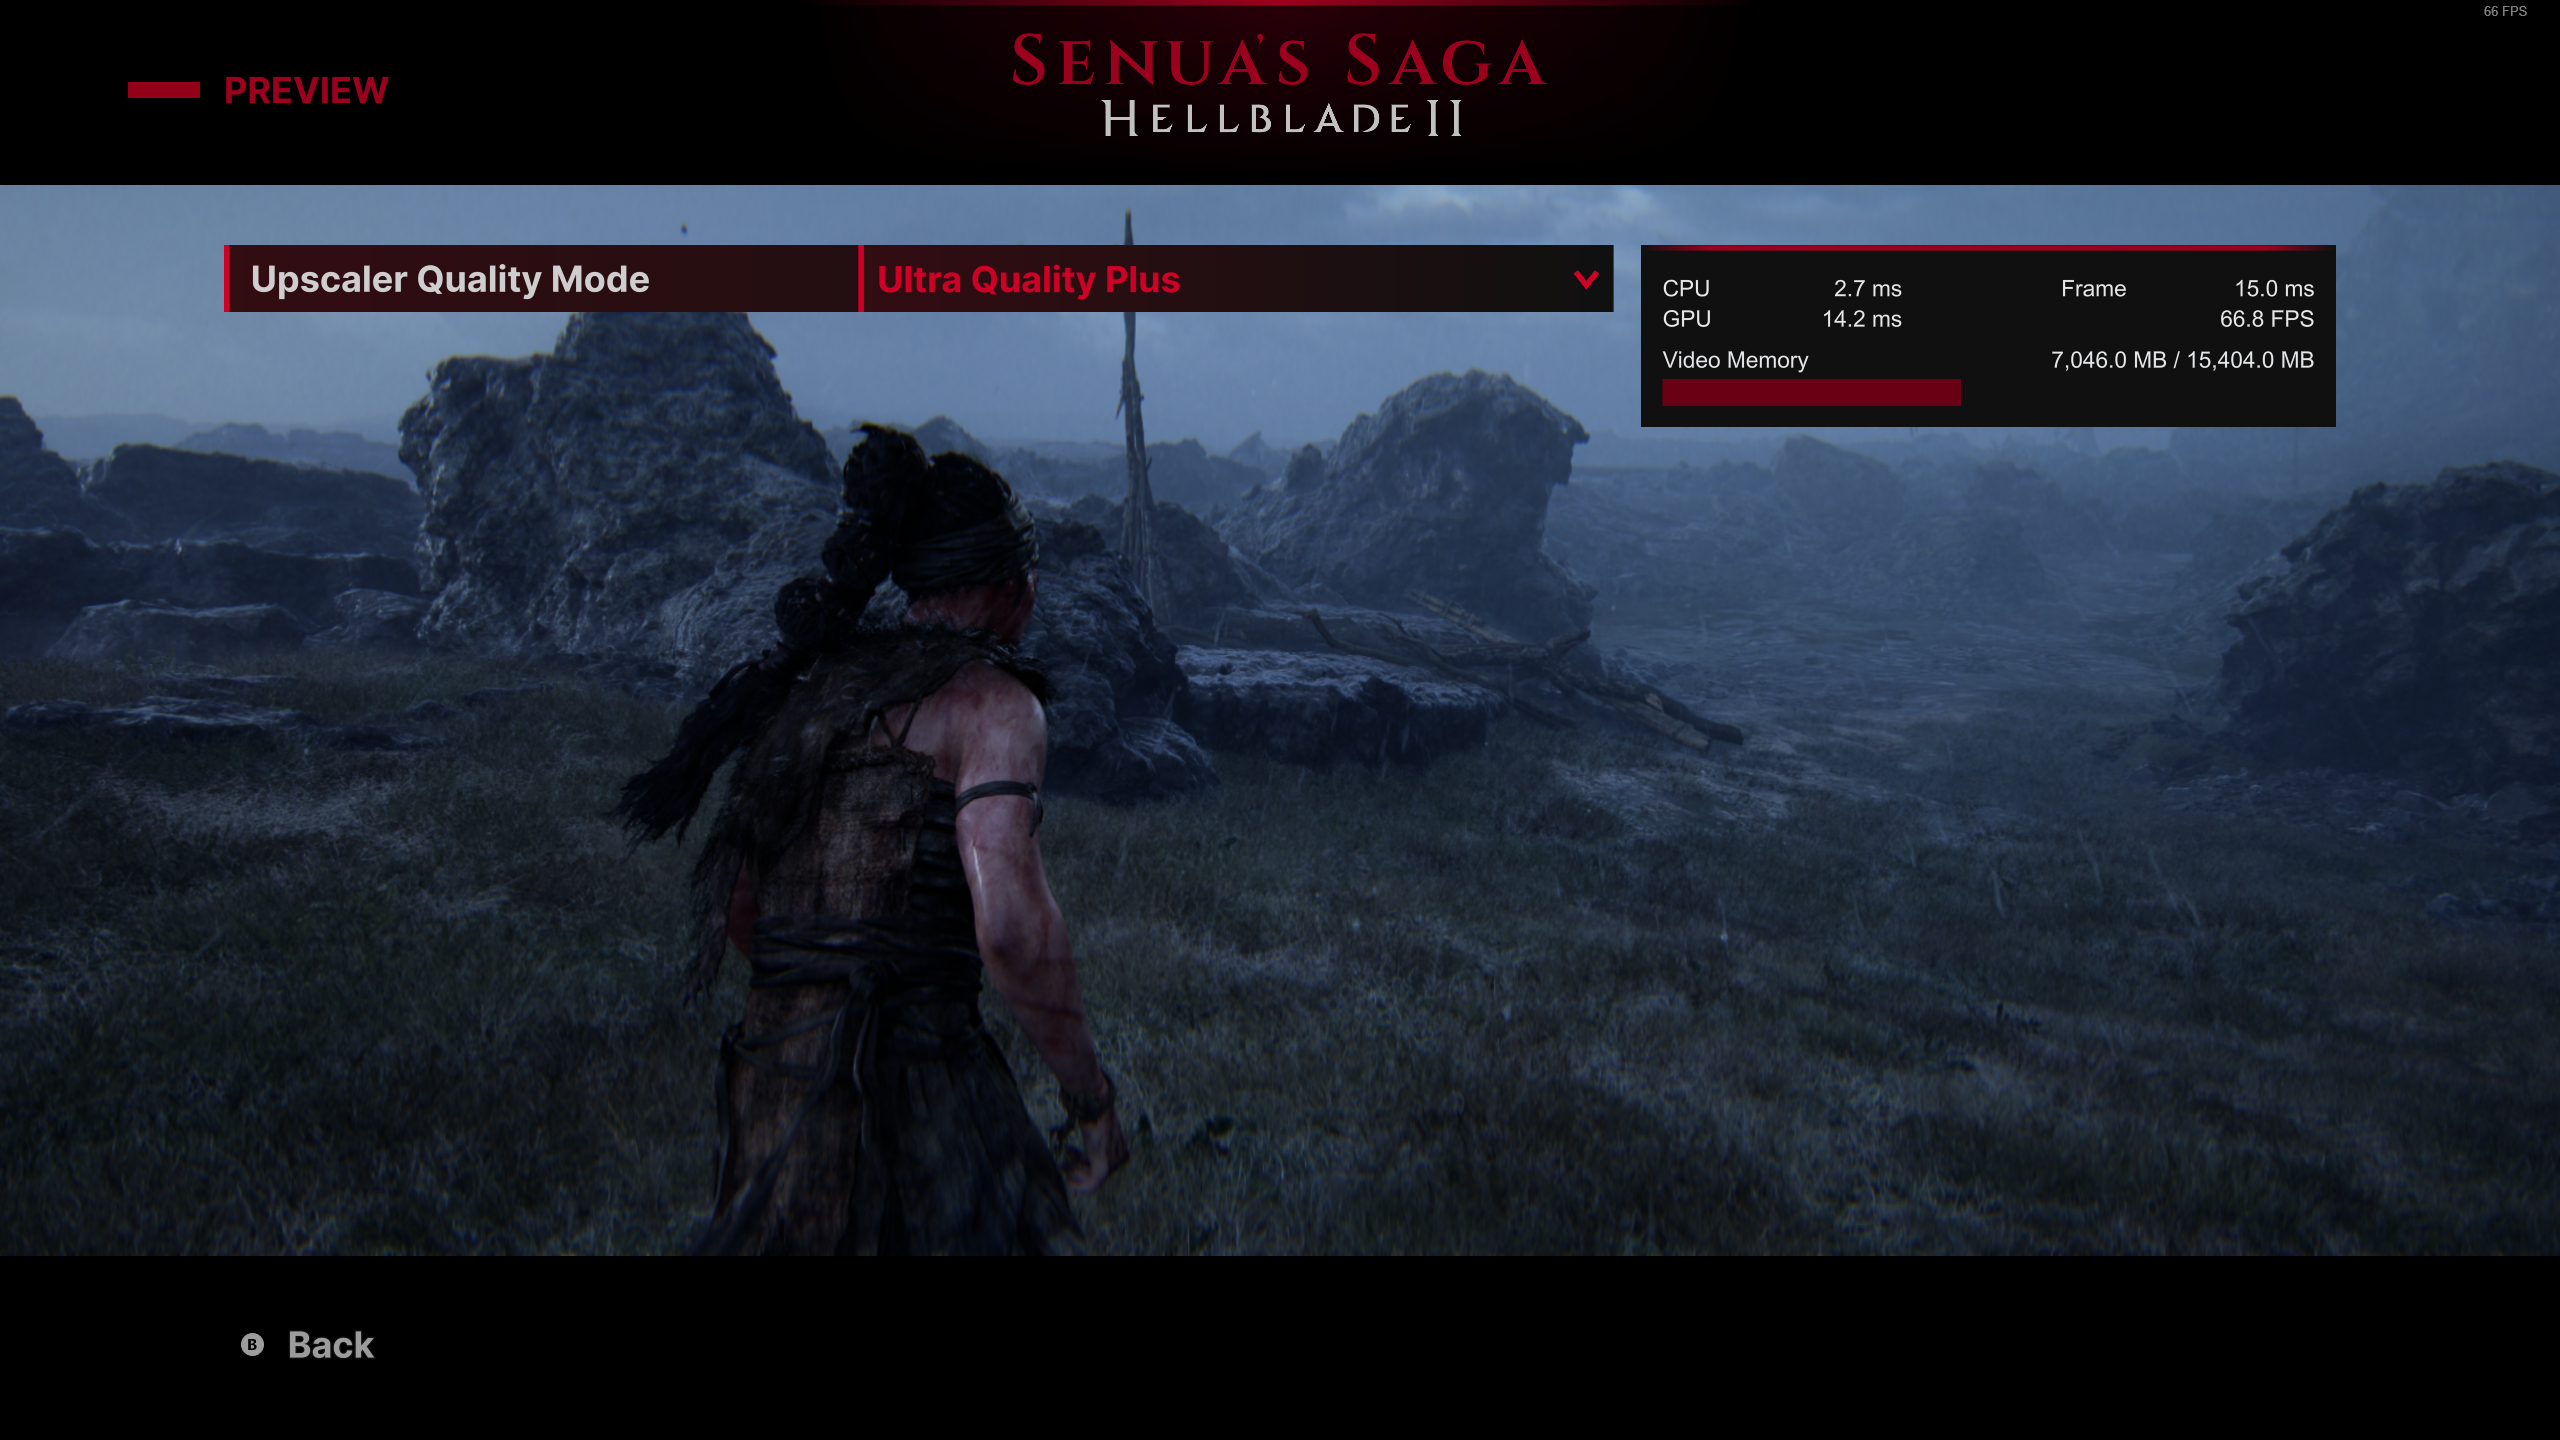 A screenshot from Senua's Saga: Hellblade 2 showing the settings preview